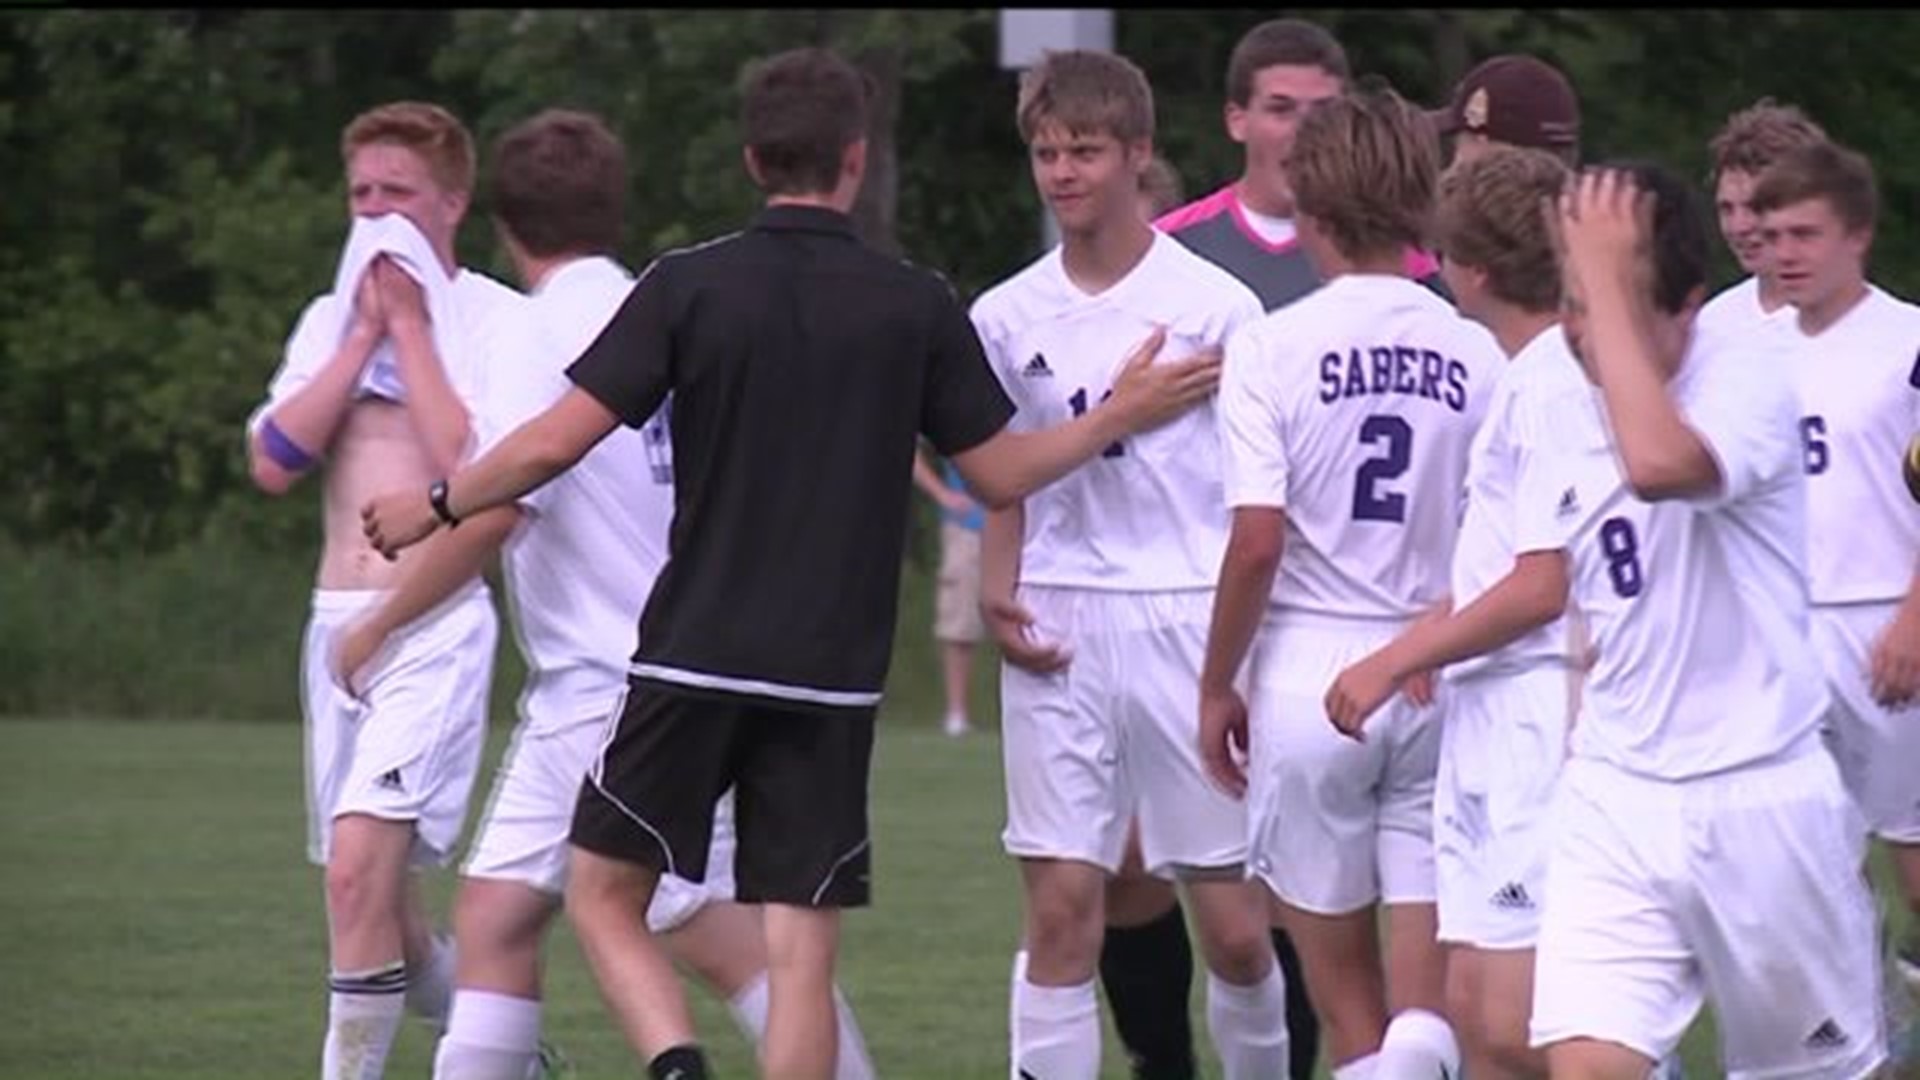 Sabers advance to Semifinals